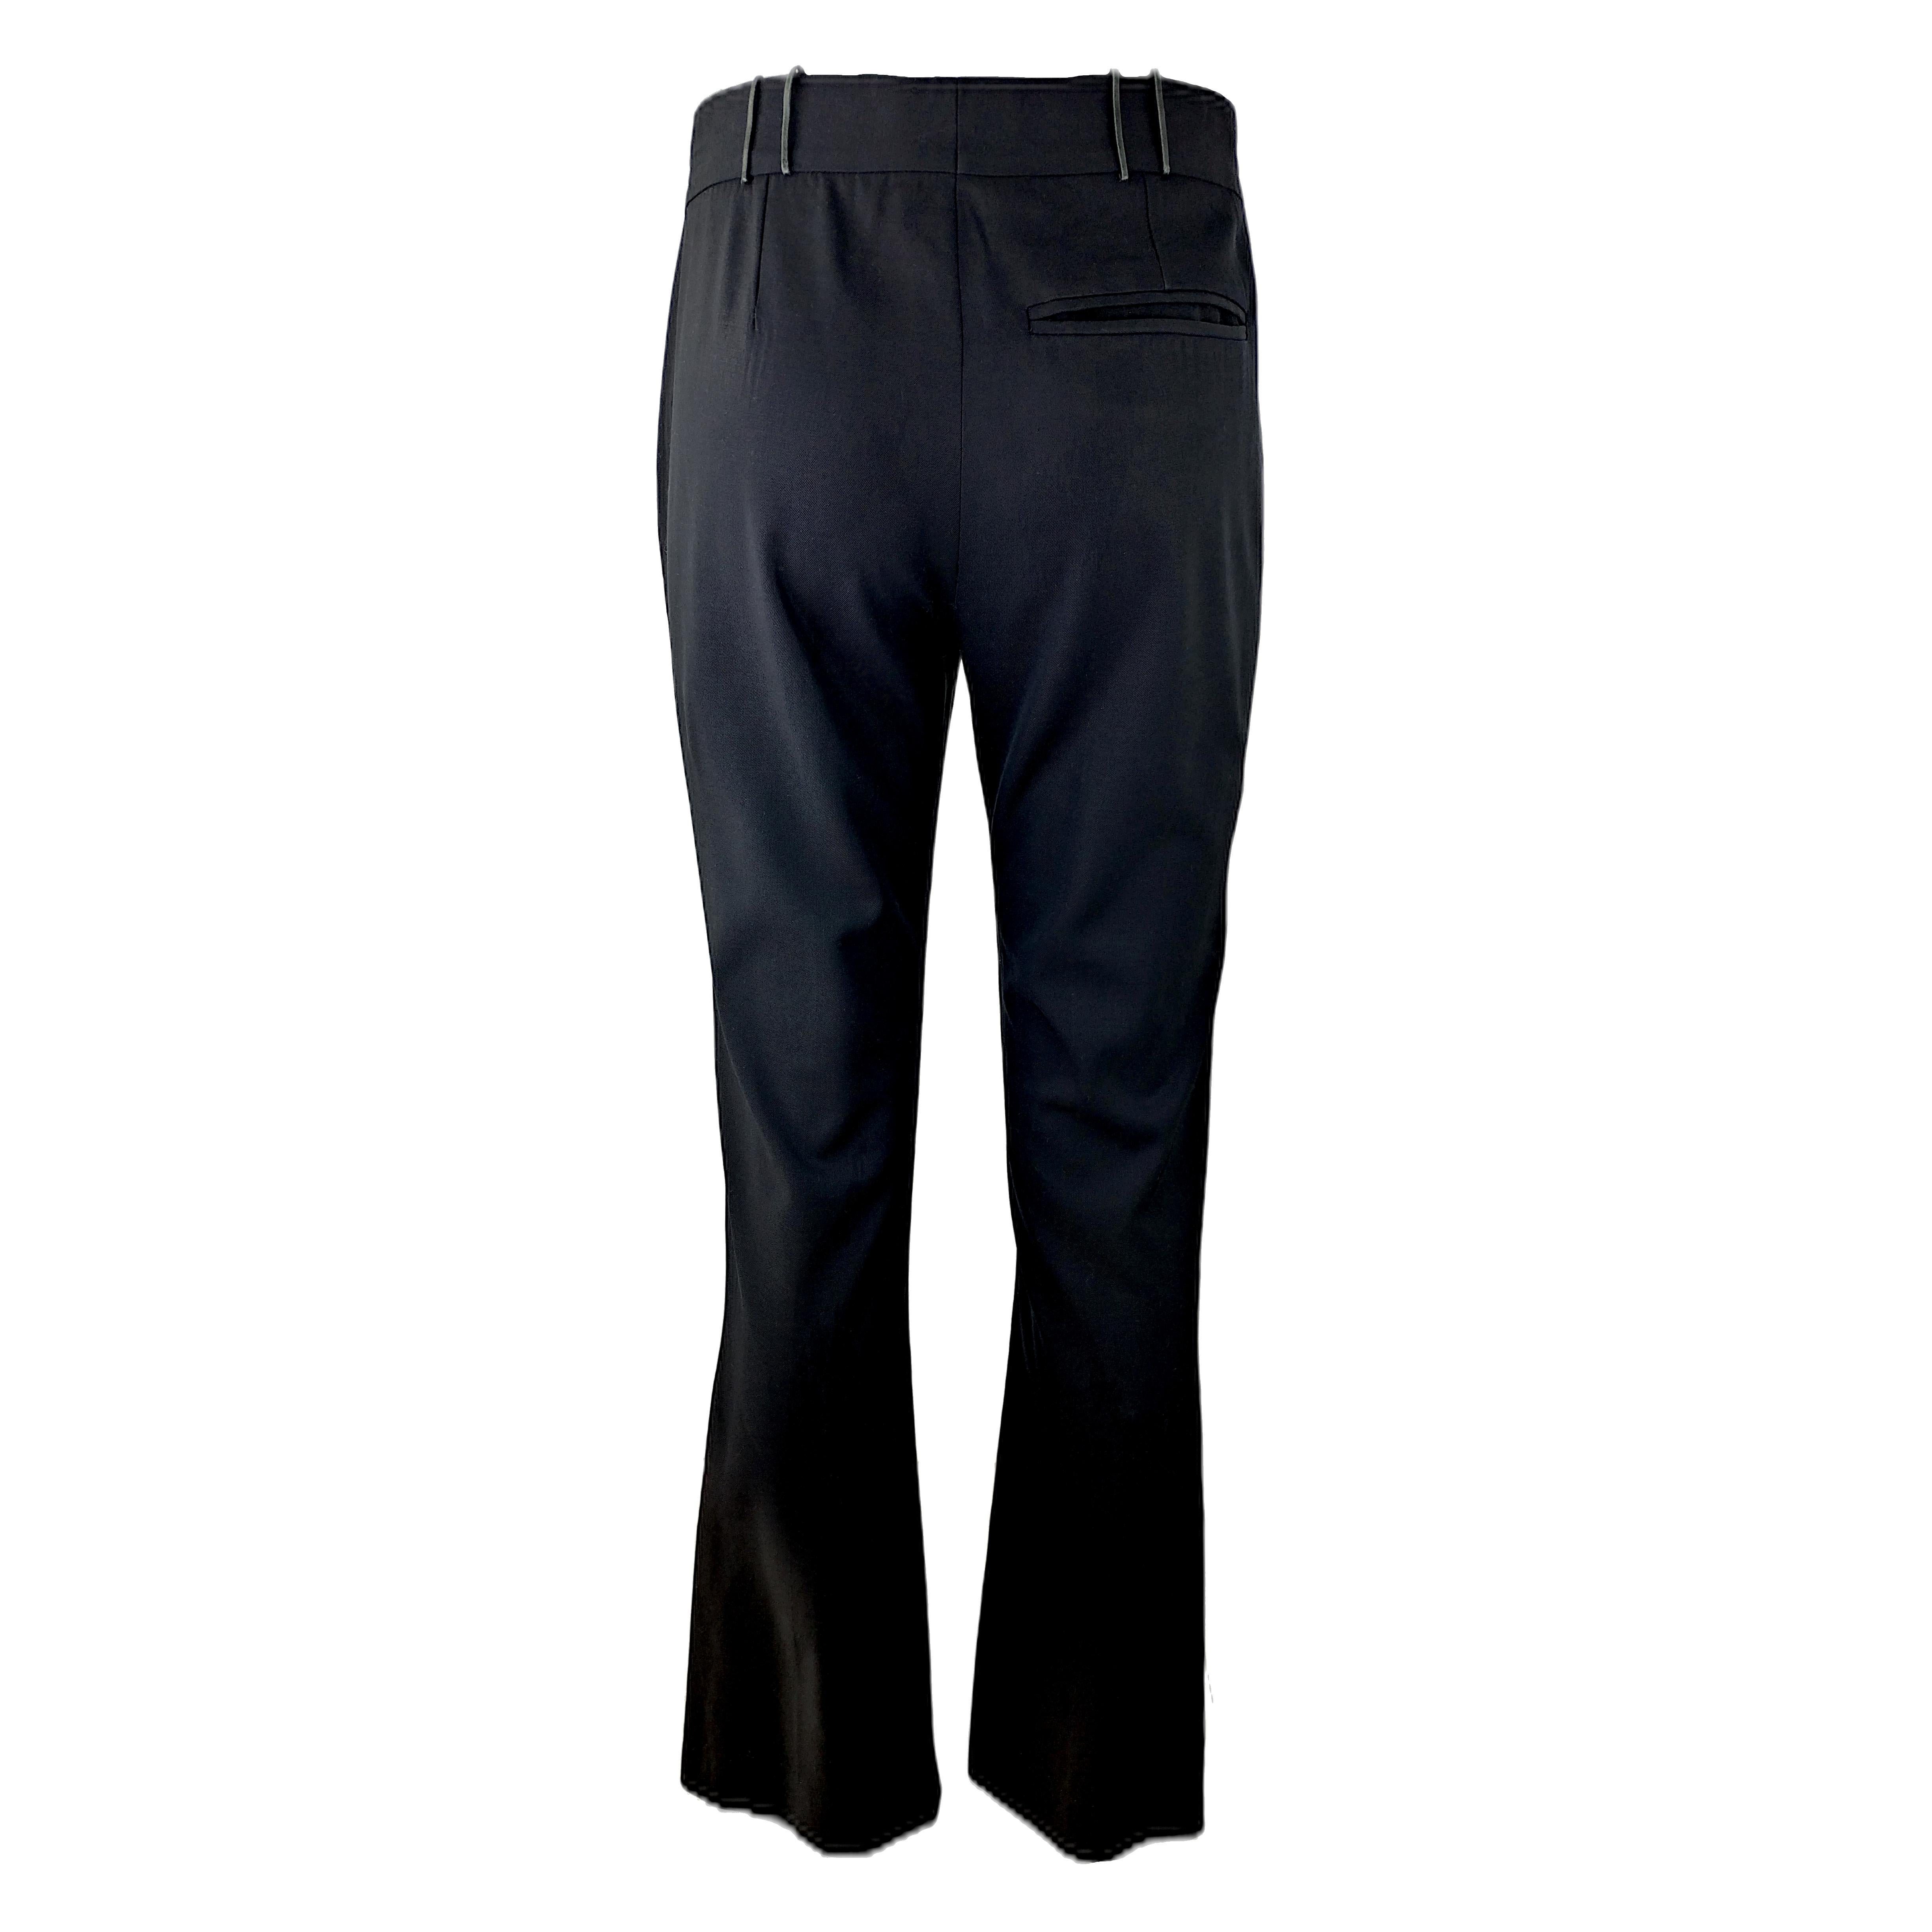 GUCCI by TOM FORD - Vintage Black Stretch Wool Pants with Bell Bottoms Size 2US In Good Condition In Cuggiono, MI